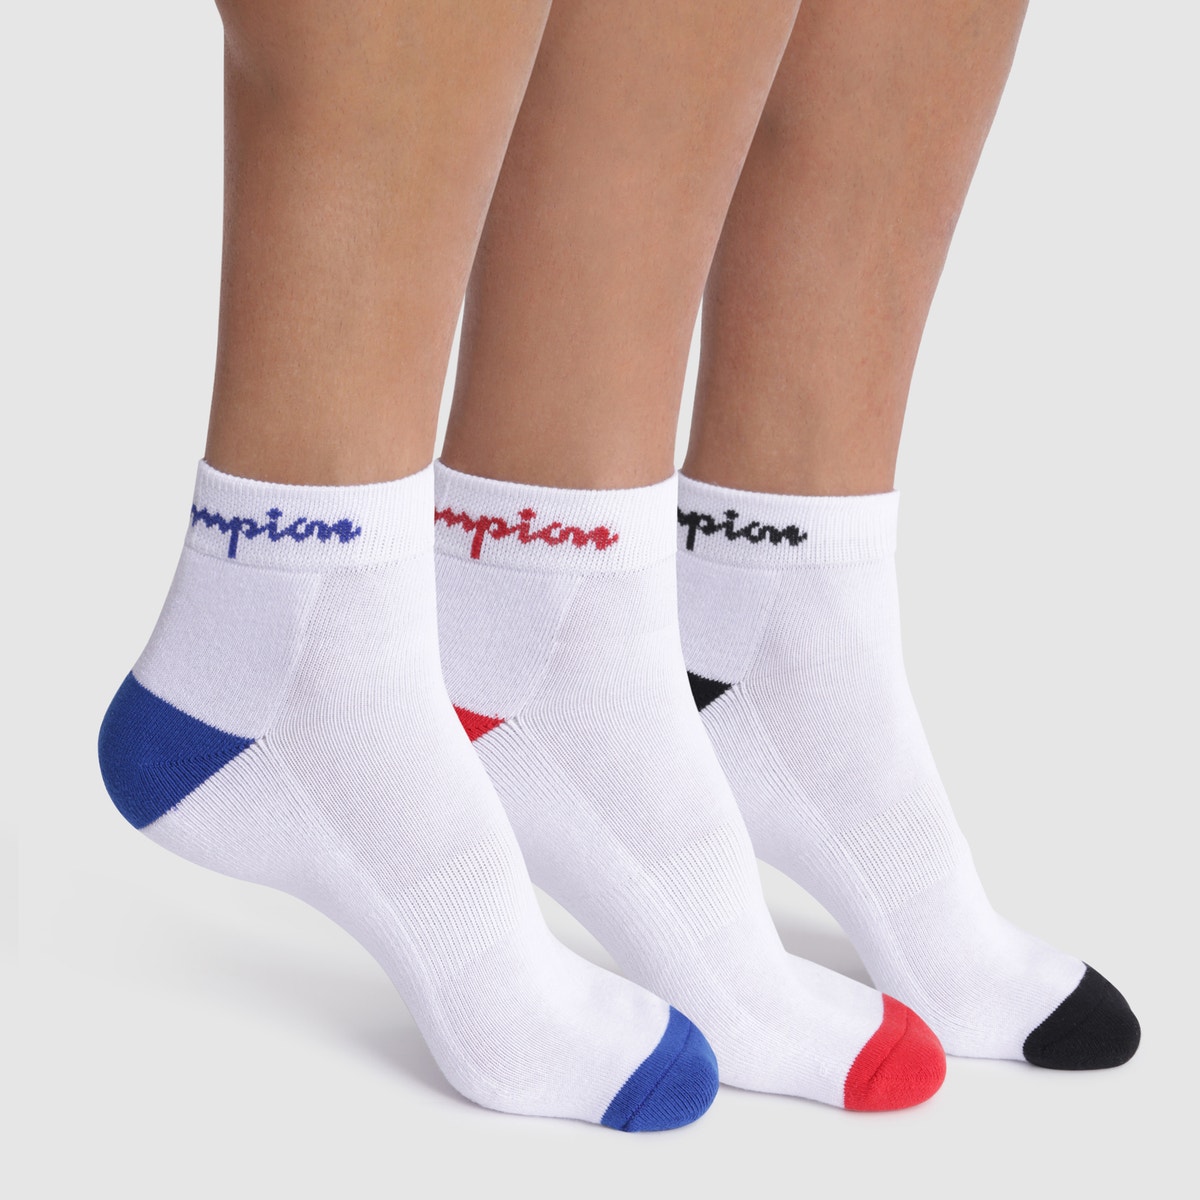 Pack of 3 Pairs of Ankle Socks